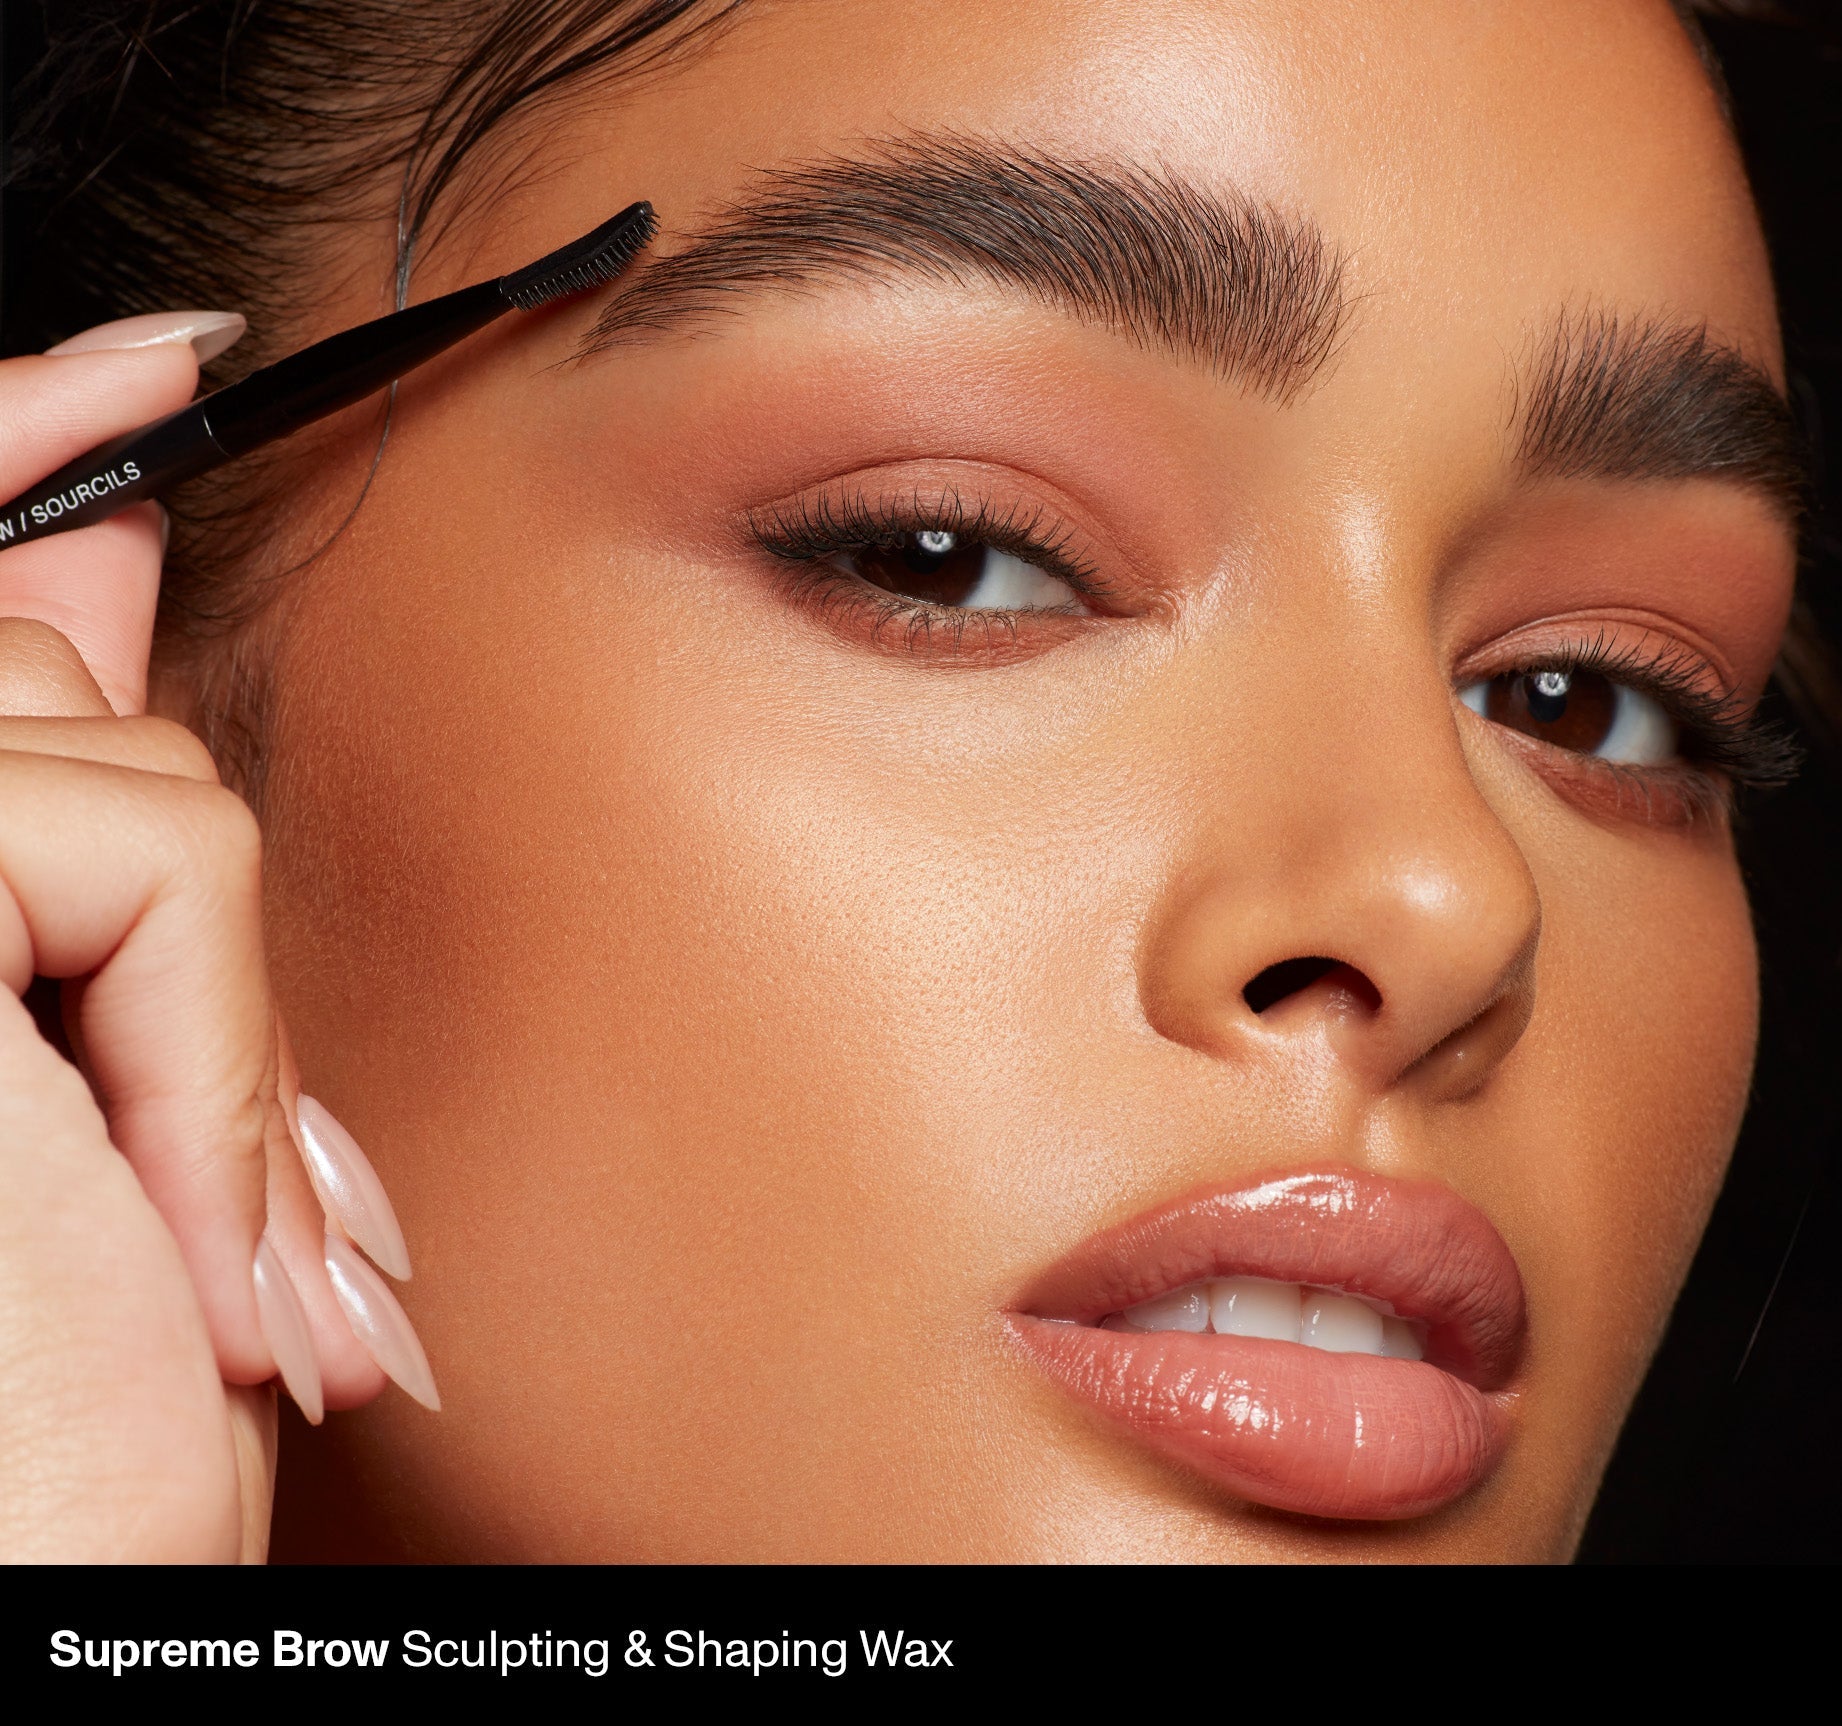 Supreme Brow Sculpting And Shaping Wax - Chocolate Mousse - Image 8